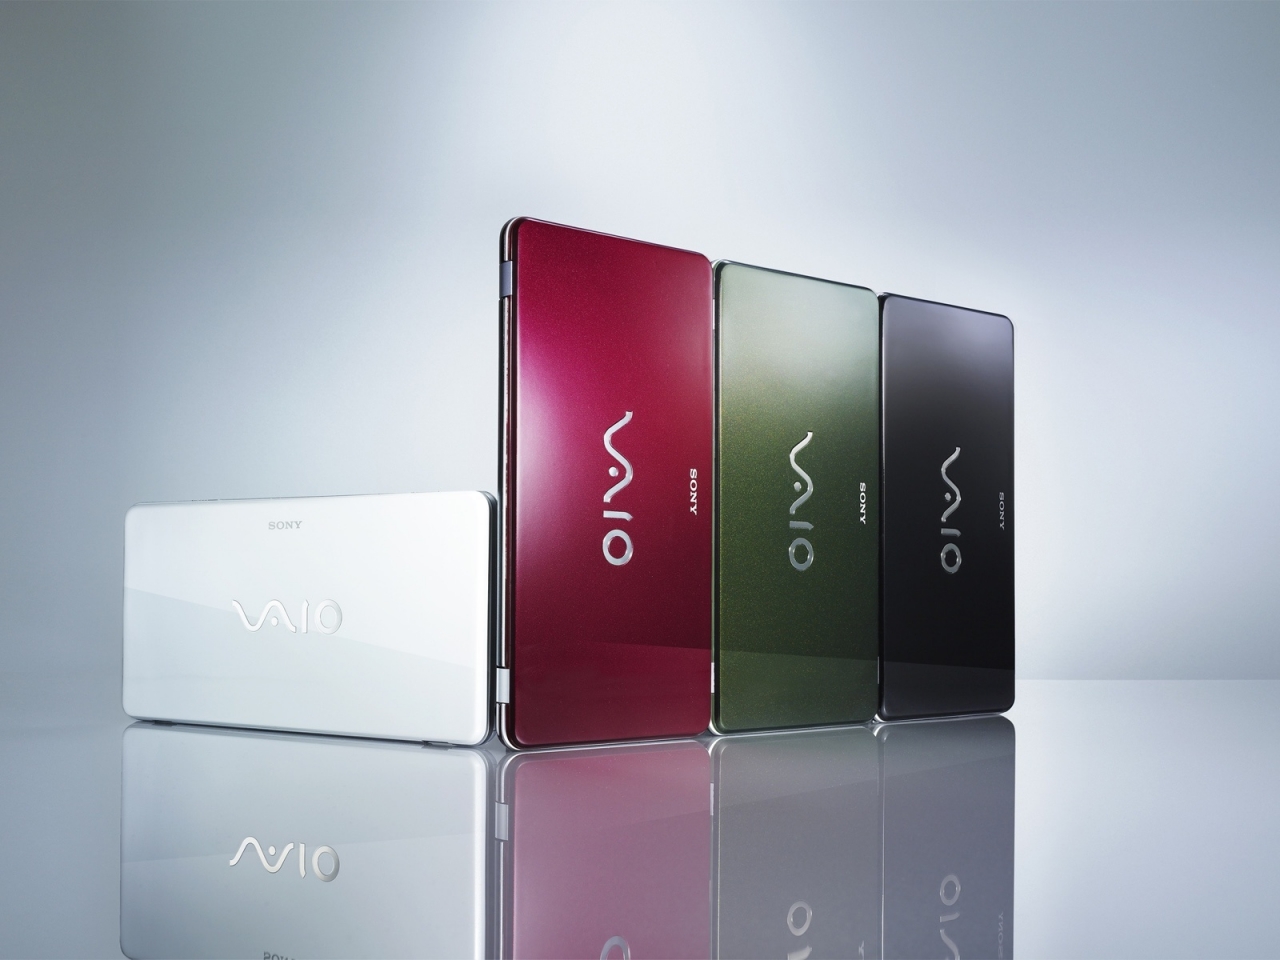 Sony Vaio 4 colors for 1280 x 960 resolution